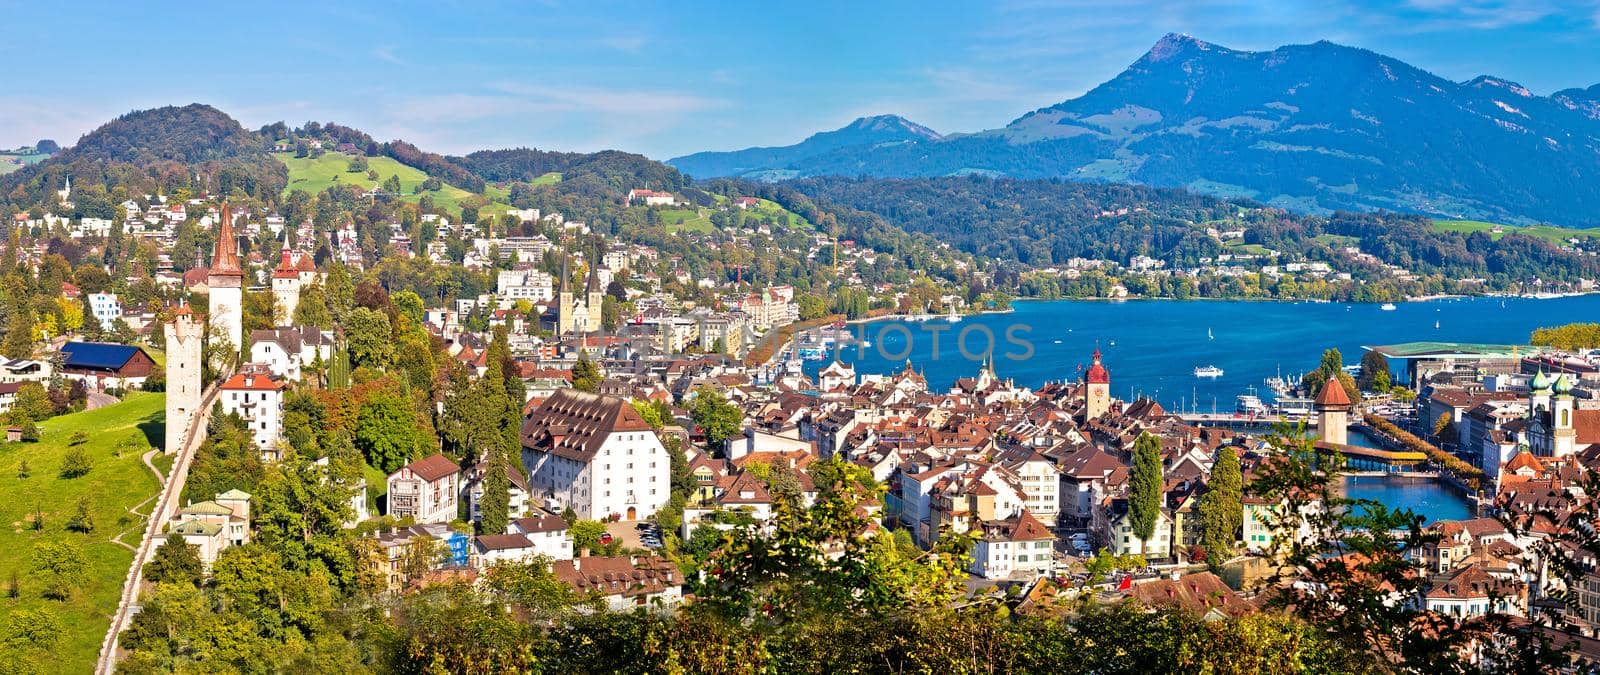 City and lake of Luzern panoramic view from the hill by xbrchx